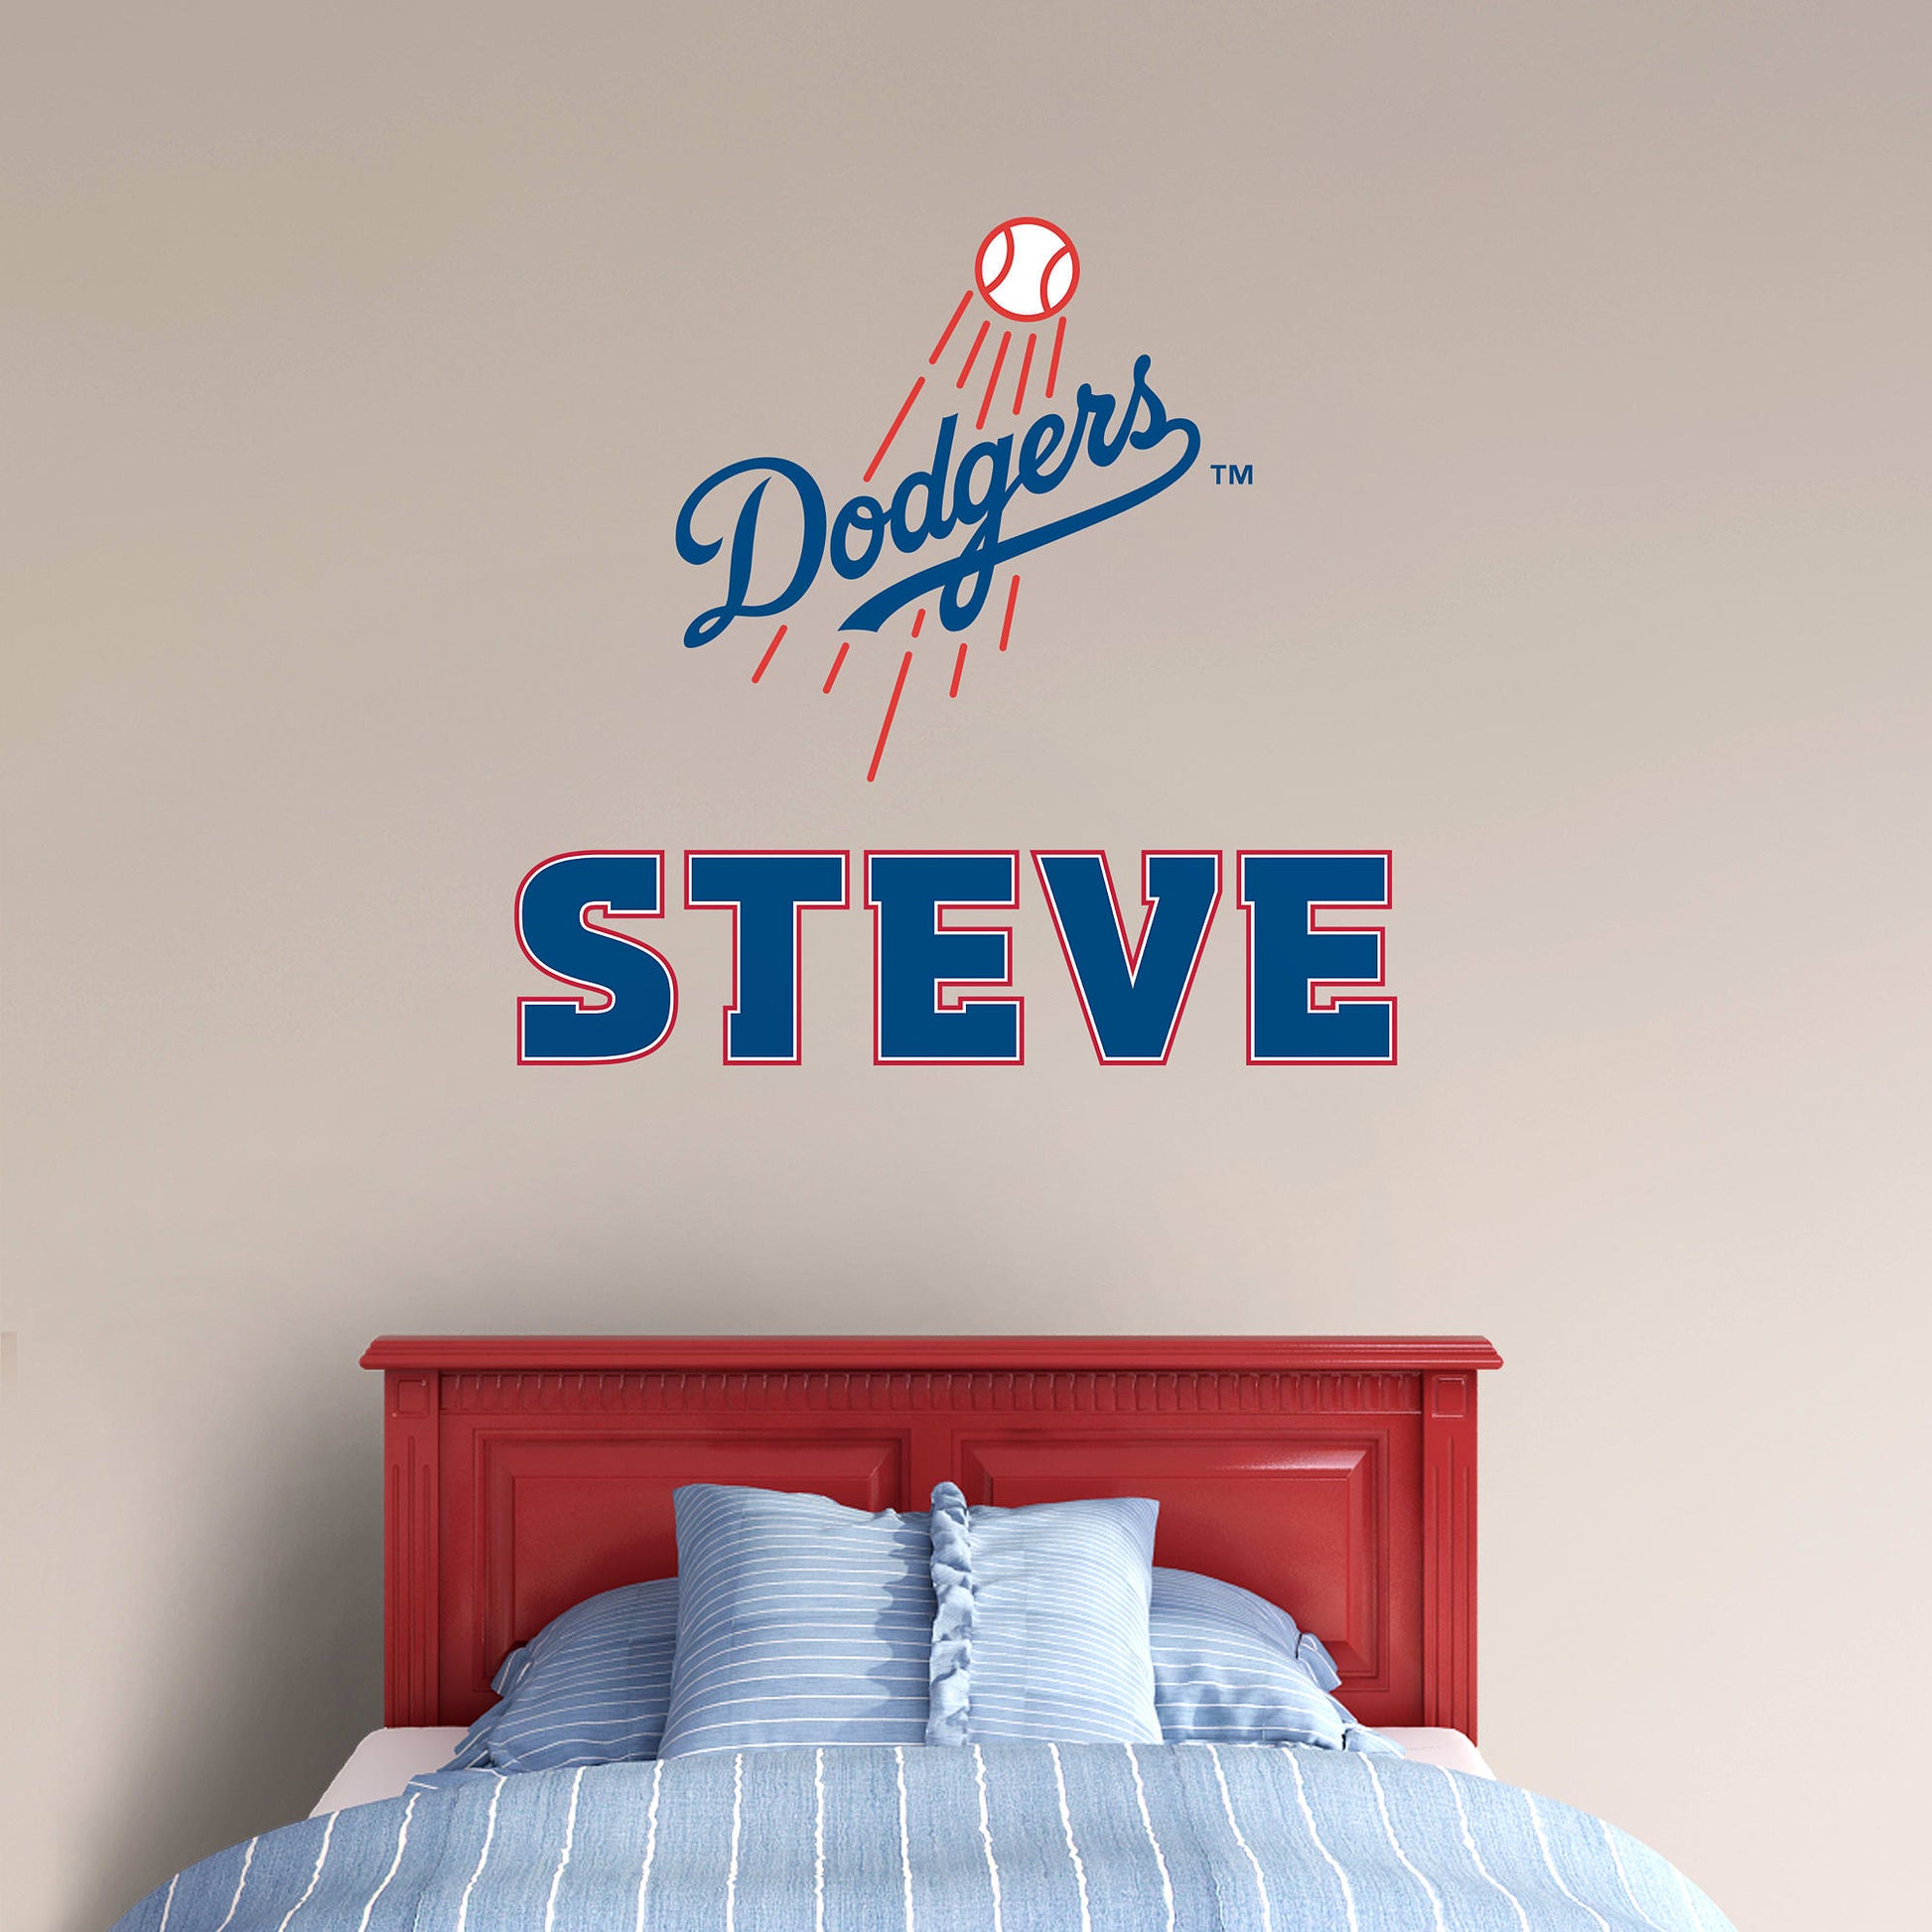 Personalized Los Angeles Dodgers Mickey Mouse All Over Print